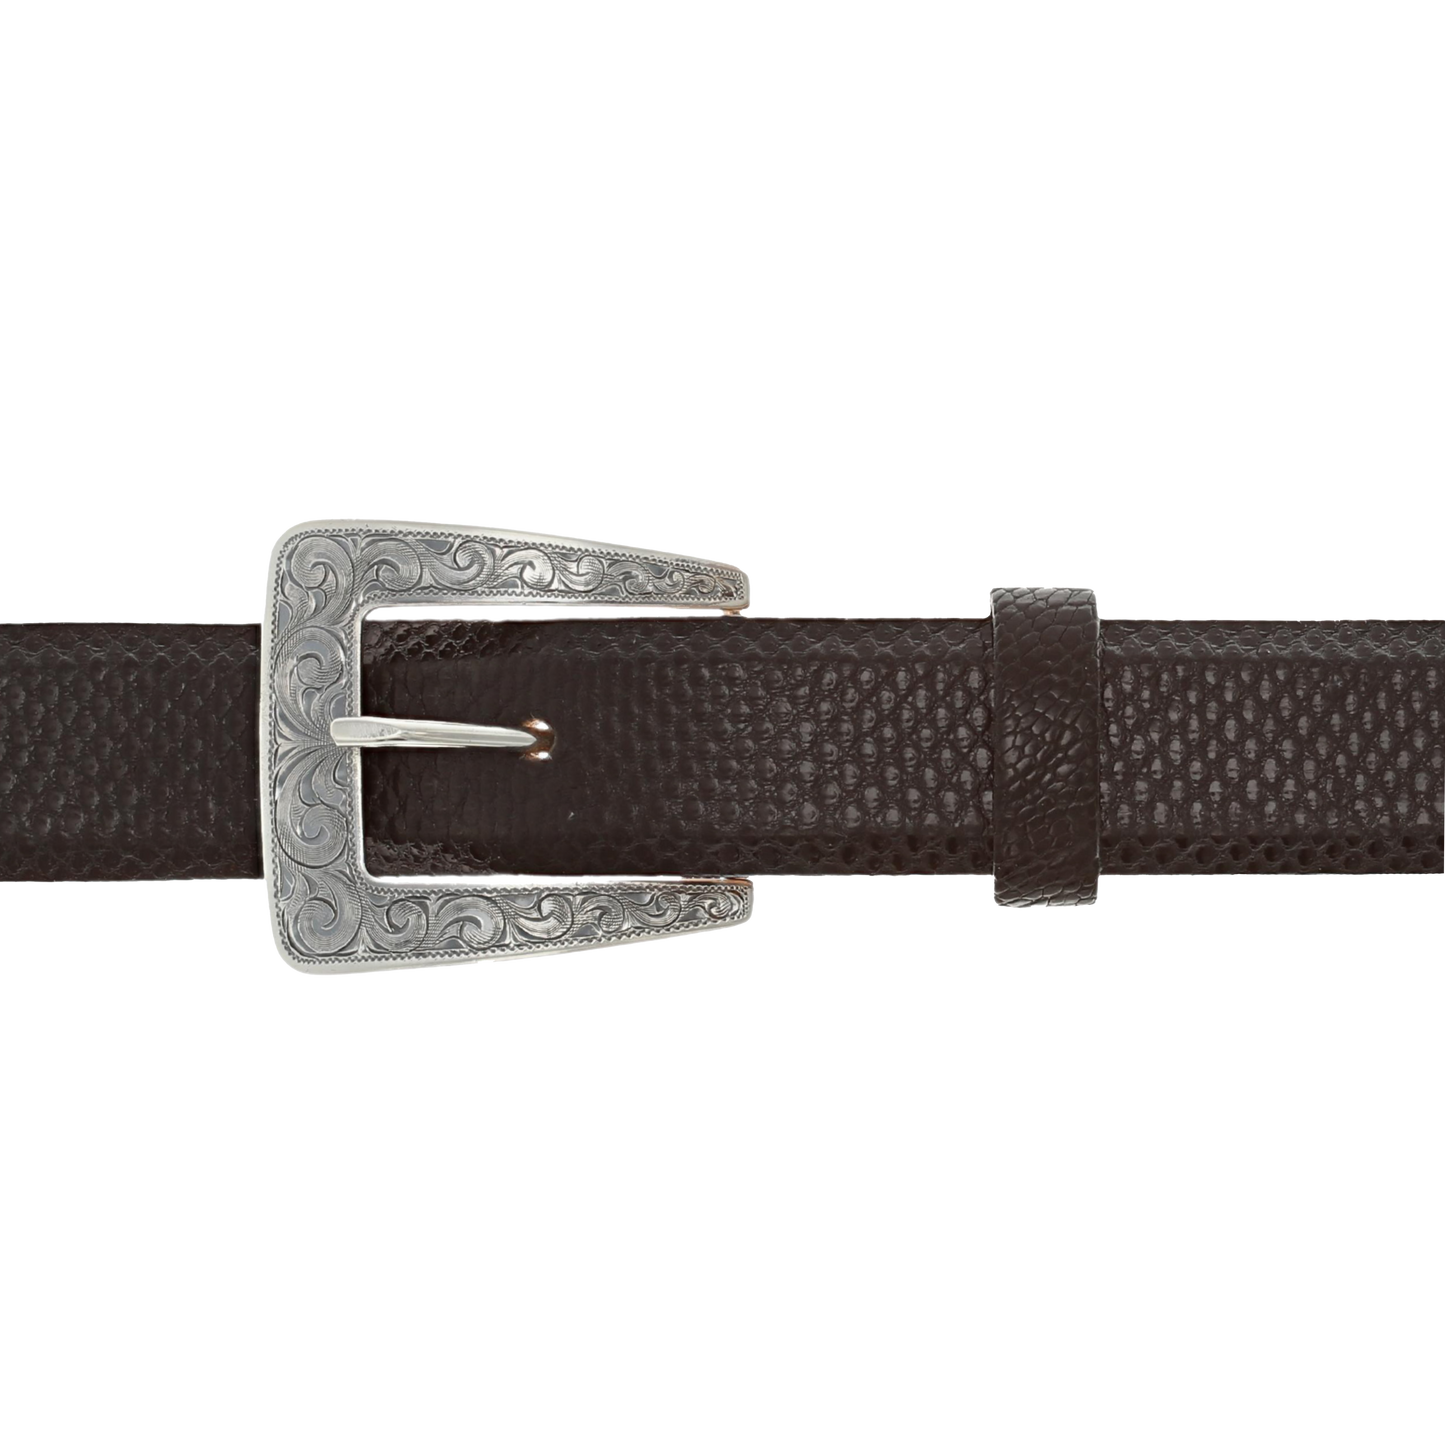 Clint Orms 1" Engraved Single Buckle